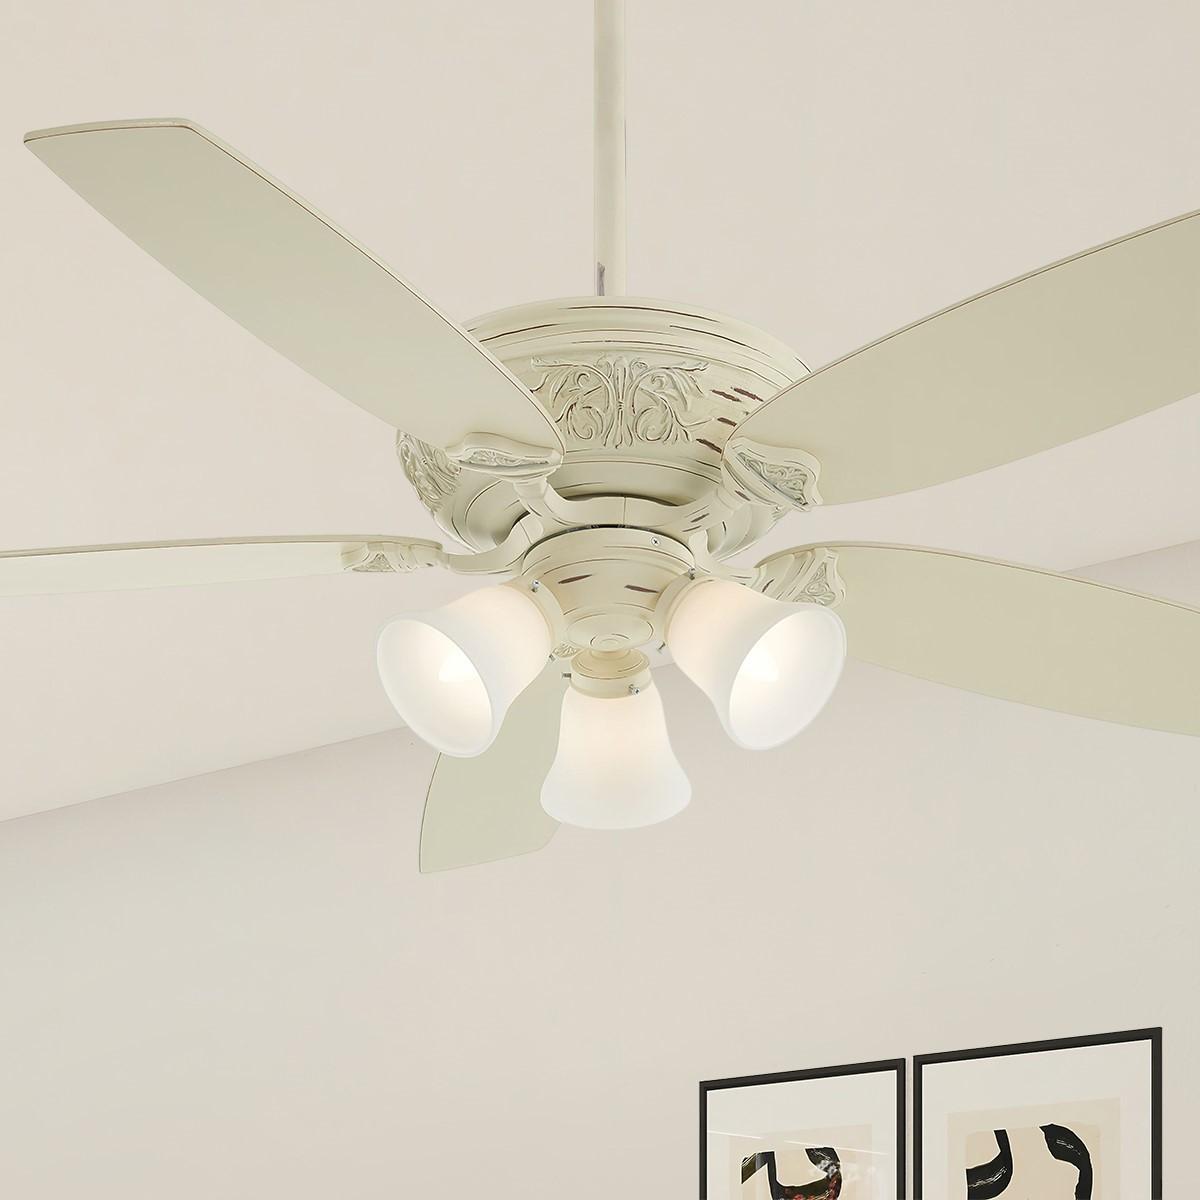 Classica 54 Inch Ceiling Fan With Light And Remote, Provencal Blanc Finish - Bees Lighting